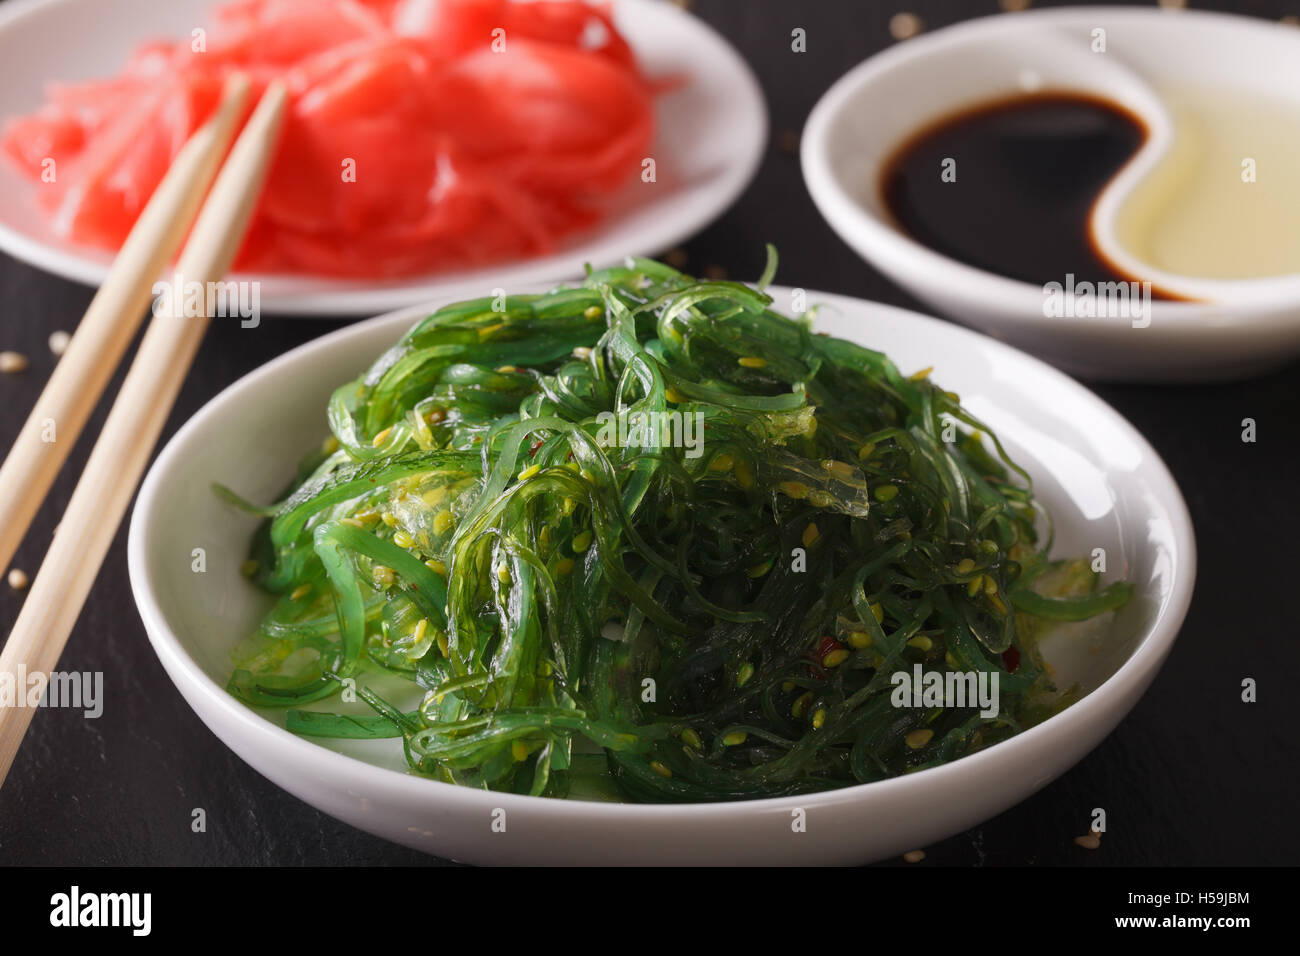 Chuka salad and pickled ginger close-up on the table. Horizontal Stock Photo